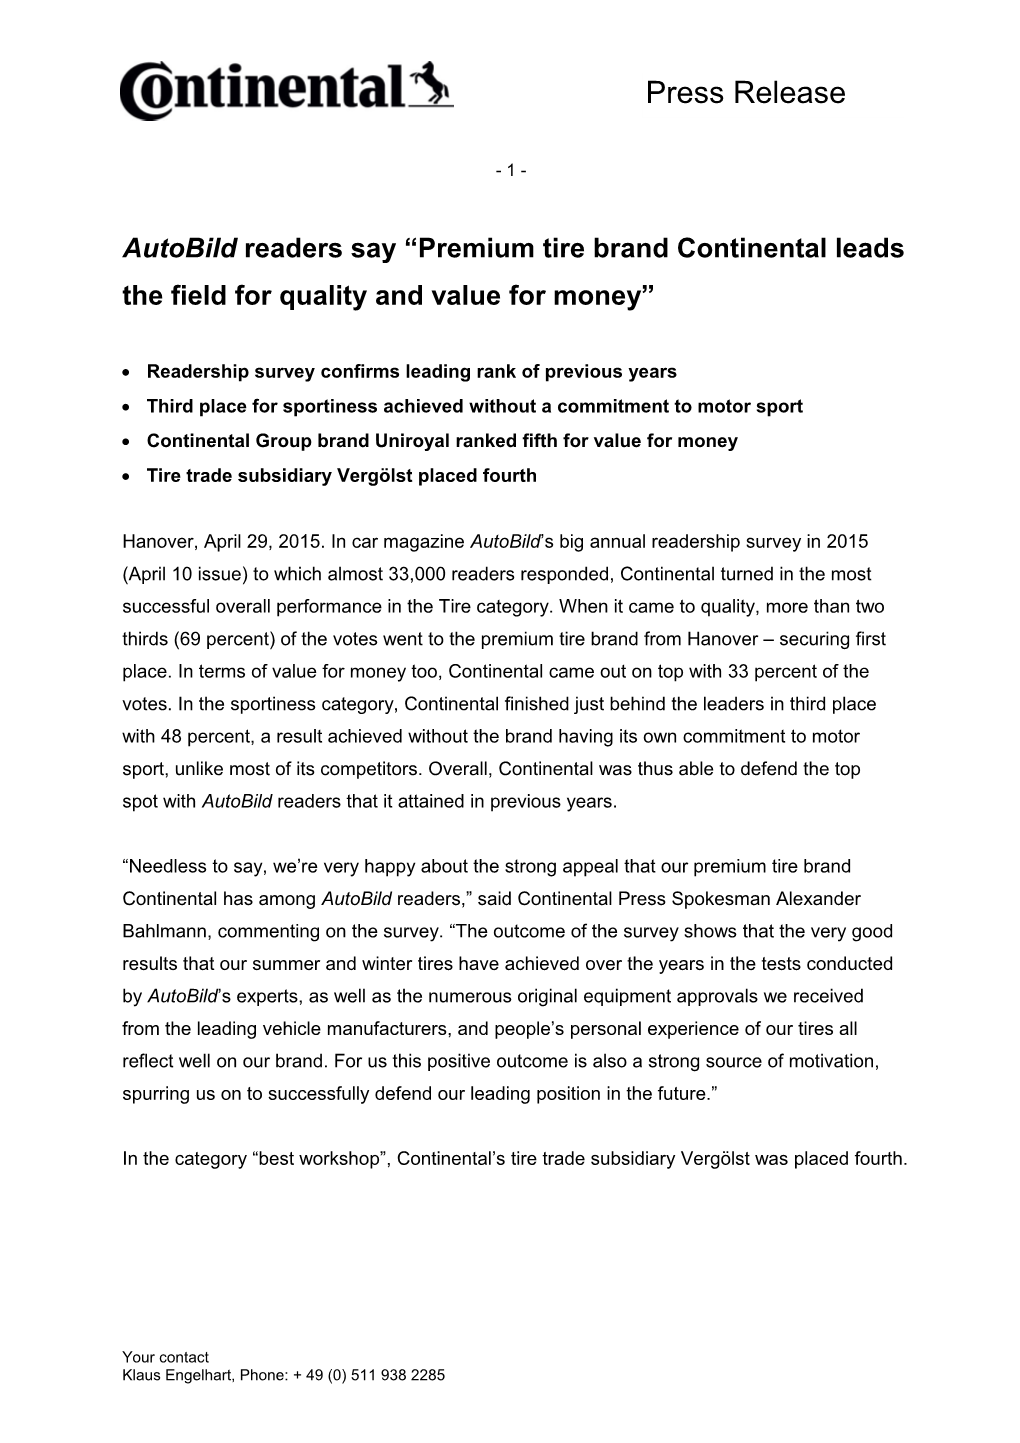 Autobild Readers Say Premium Tire Brand Continental Leads the Field for Quality and Value